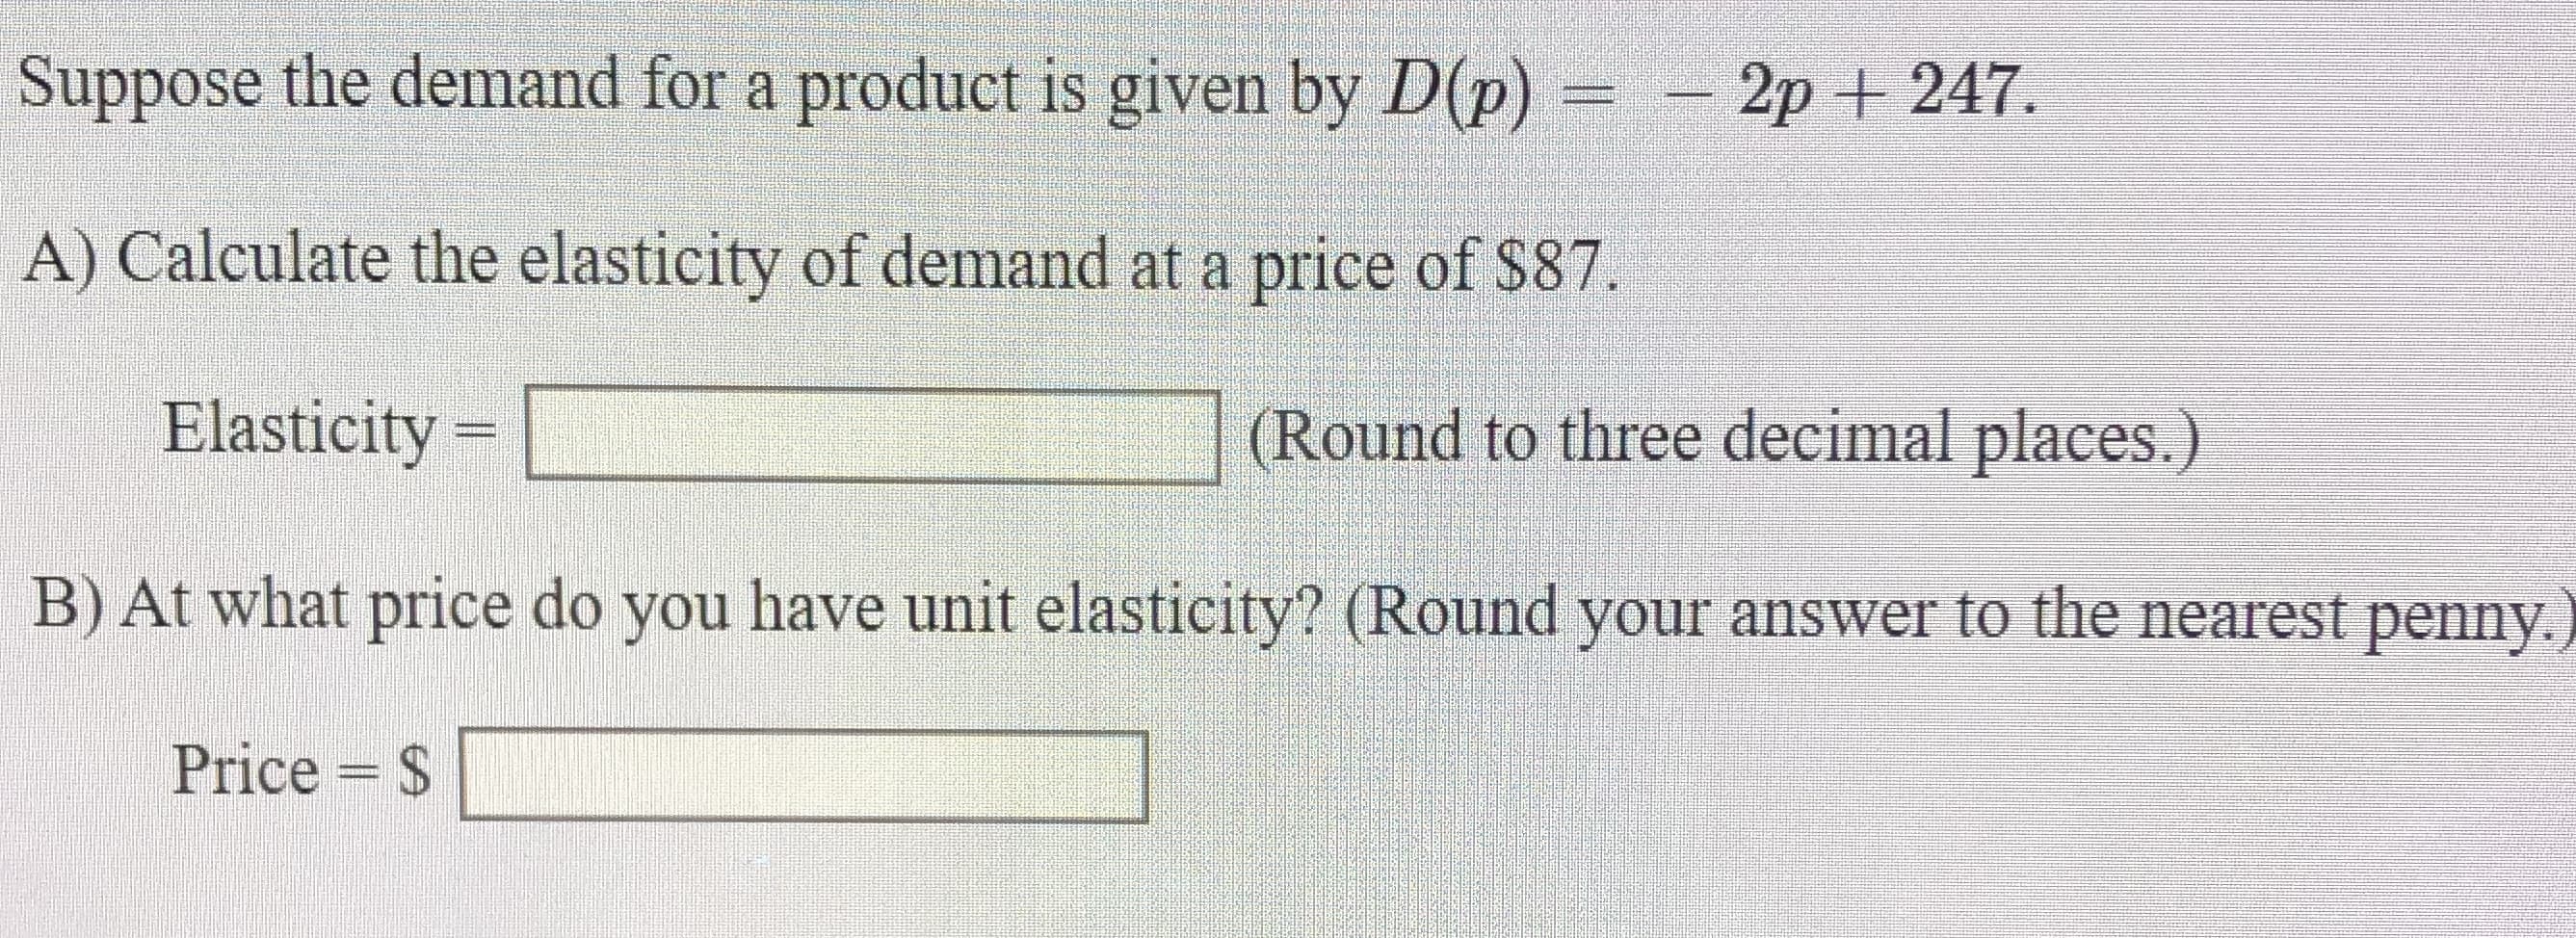 Suppose the demand for a product is given by D(p) = - 2p + 247.
A) Calculate the elasticity of demand at a price of $87.
